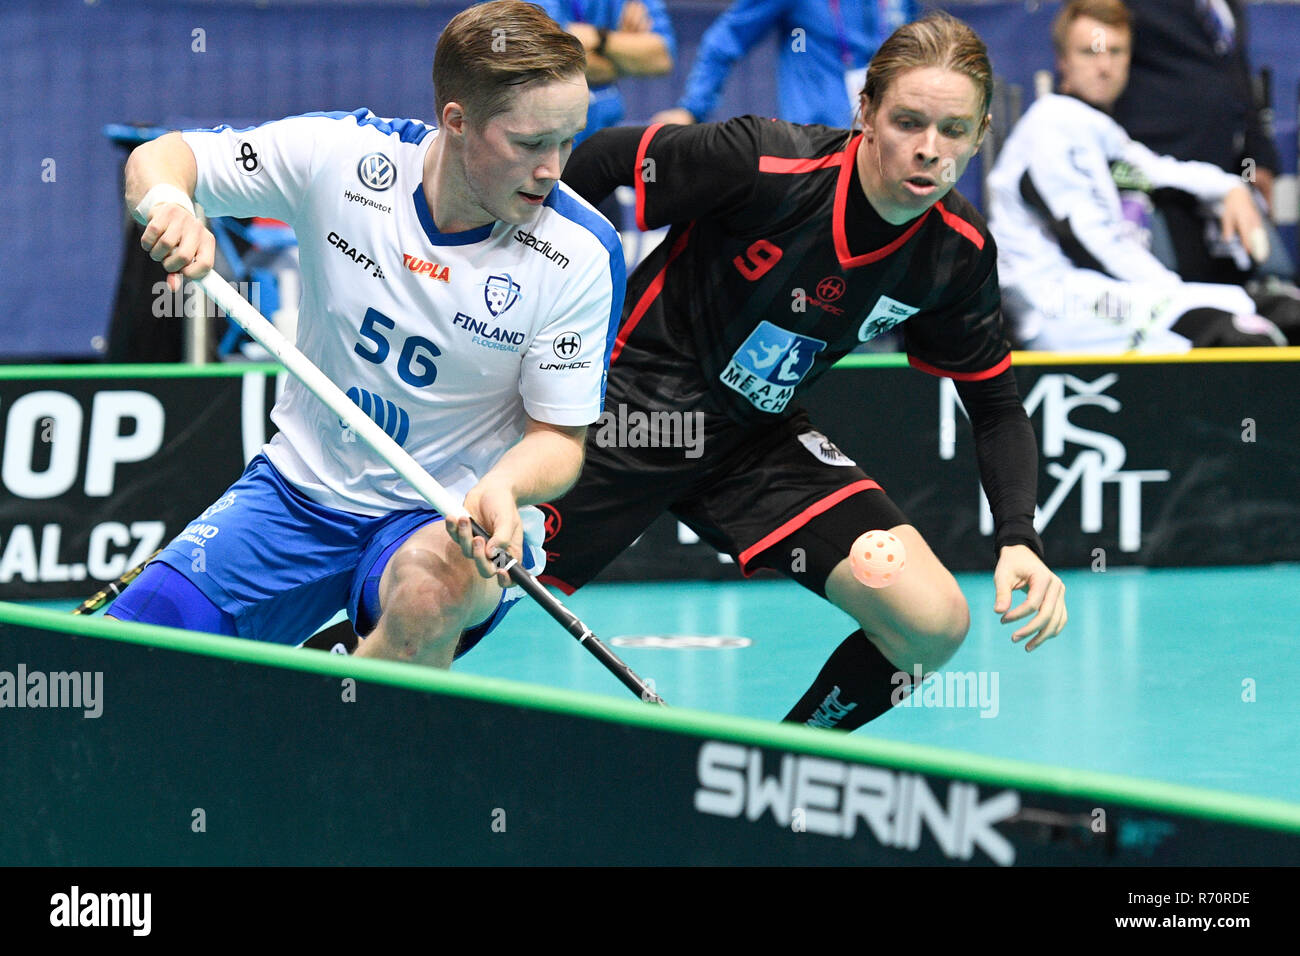 Prague, Czech Republic. 07th Dec, 2018. L-R Krister Savonen (FIN) and Benjamin Borth (GER) in action during the Men's World Floorball Championships quarterfinal match Finland vs Germany, played in Prague, Czech Republic, on December 7, 2018. Credit: Michal Kamaryt/CTK Photo/Alamy Live News Stock Photo